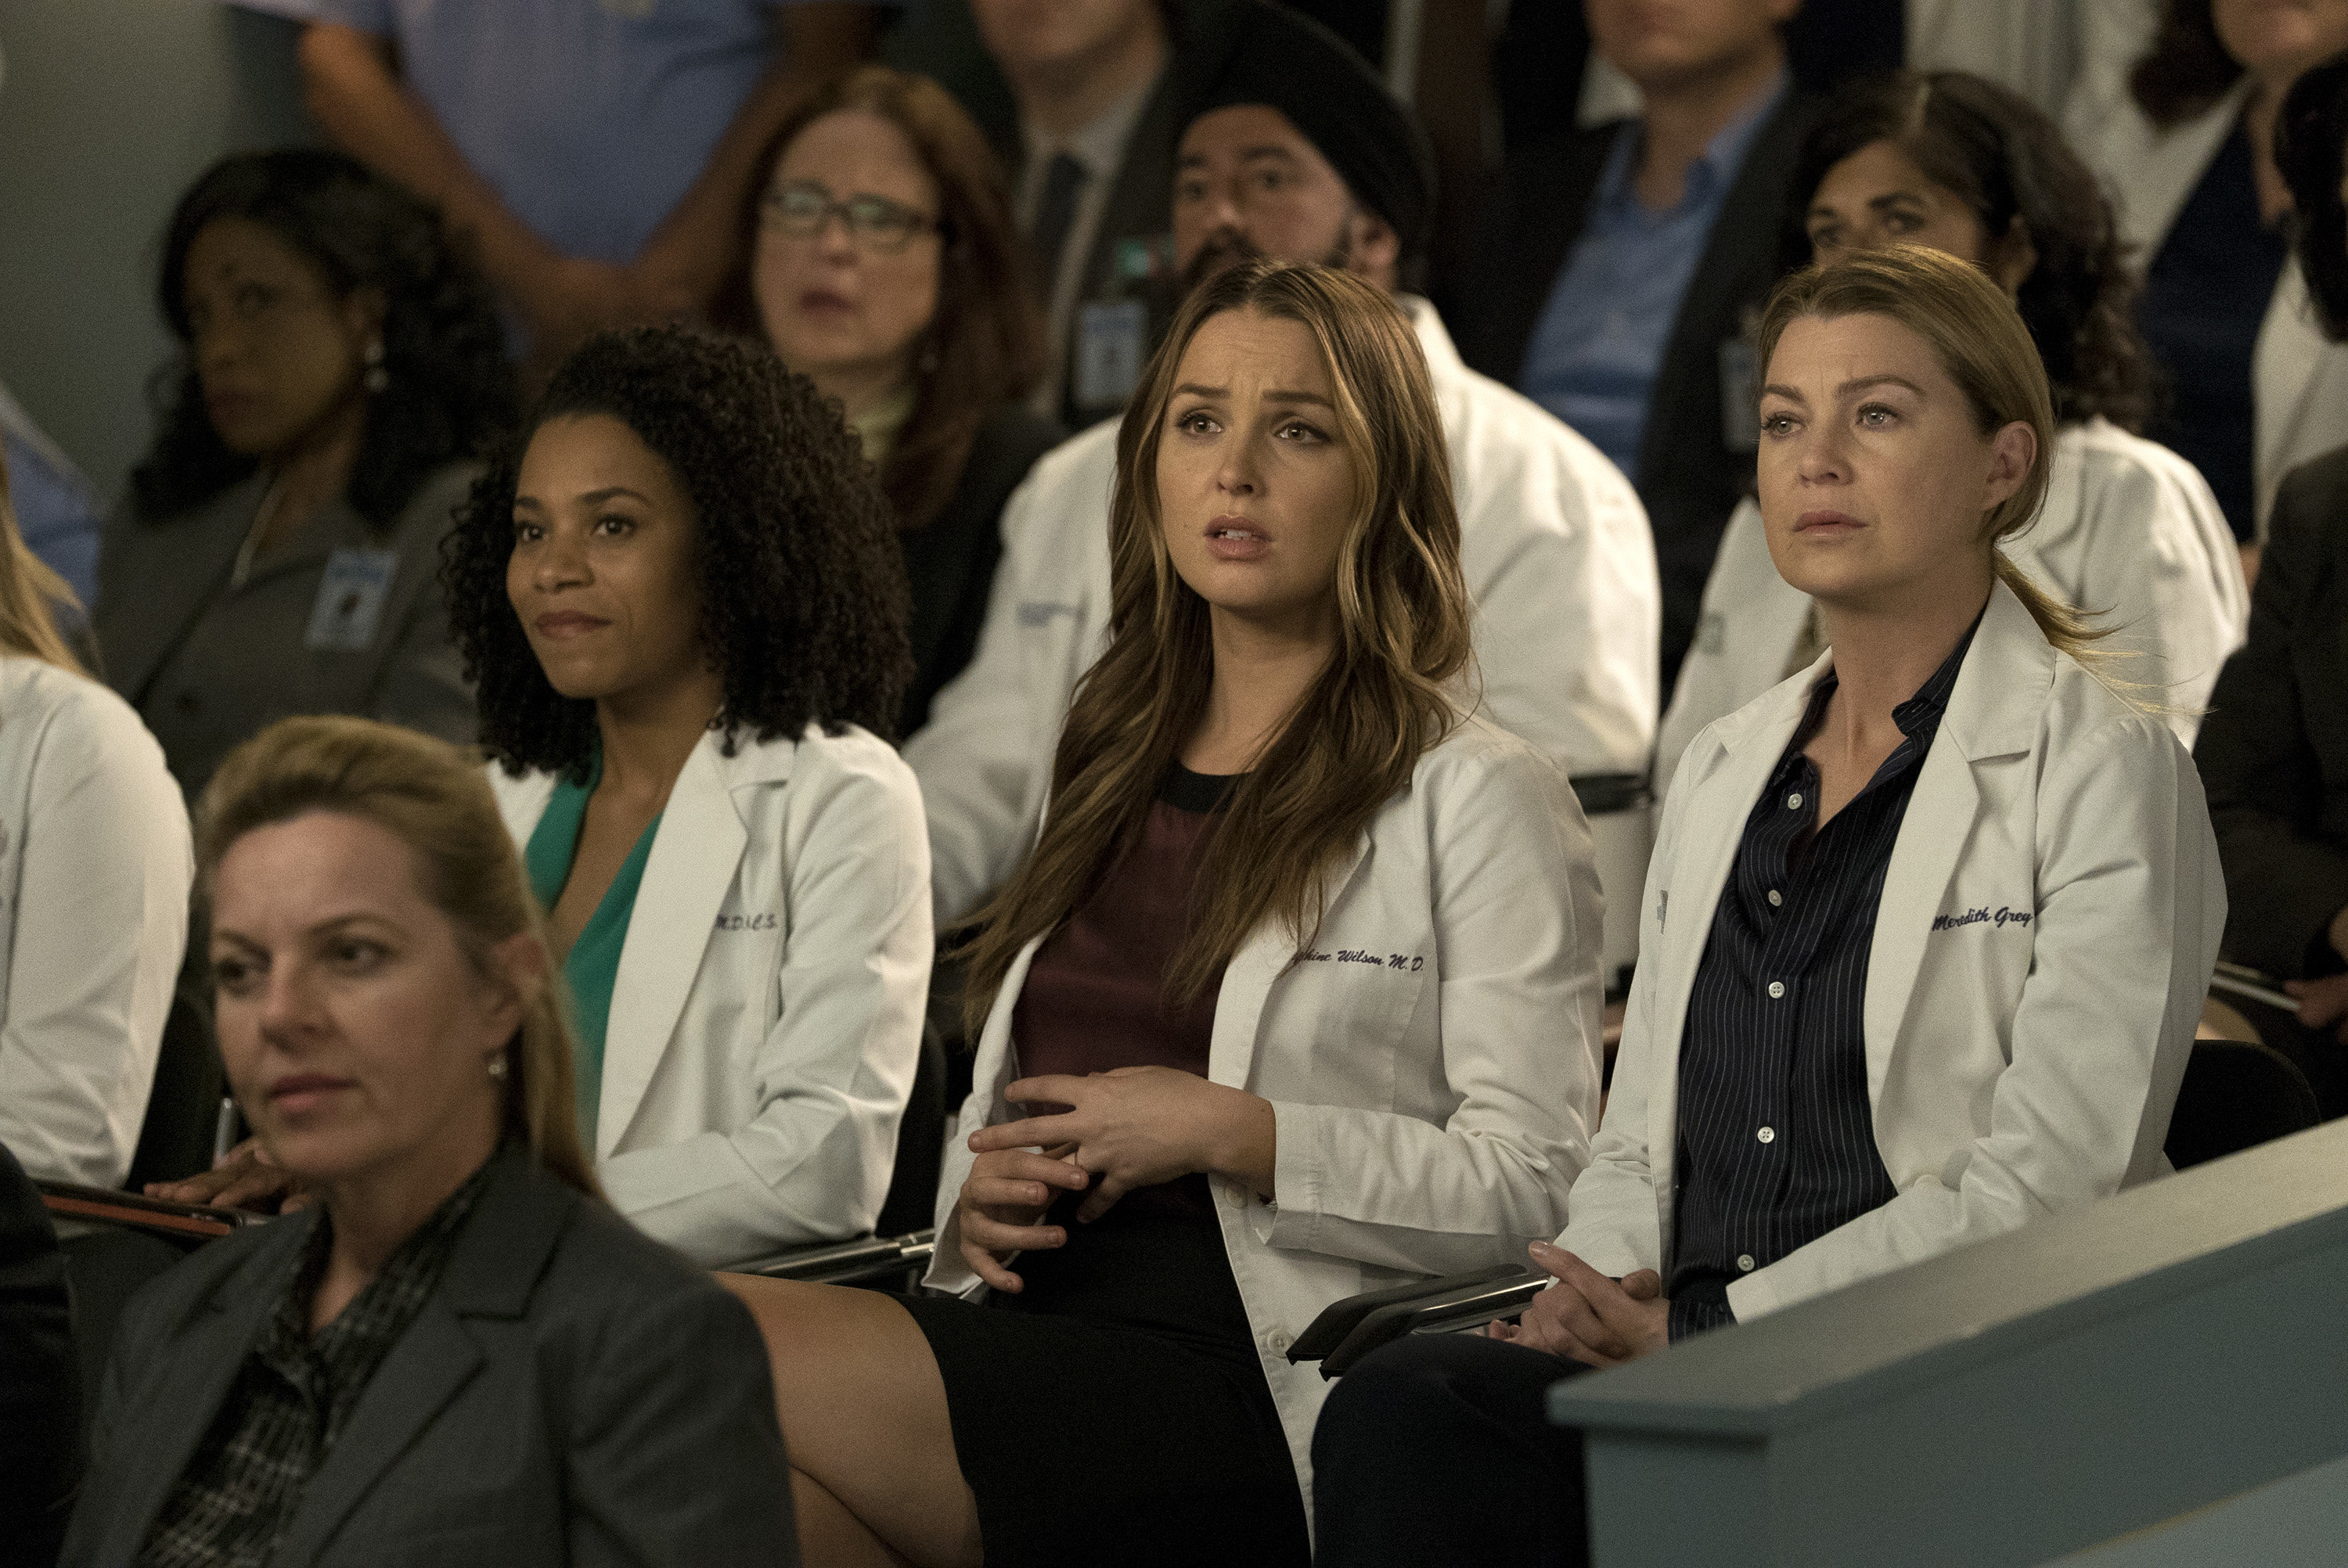 Medical Professionals Fact-Check Greys Anatomy Sex Scenes HuffPost Entertainment